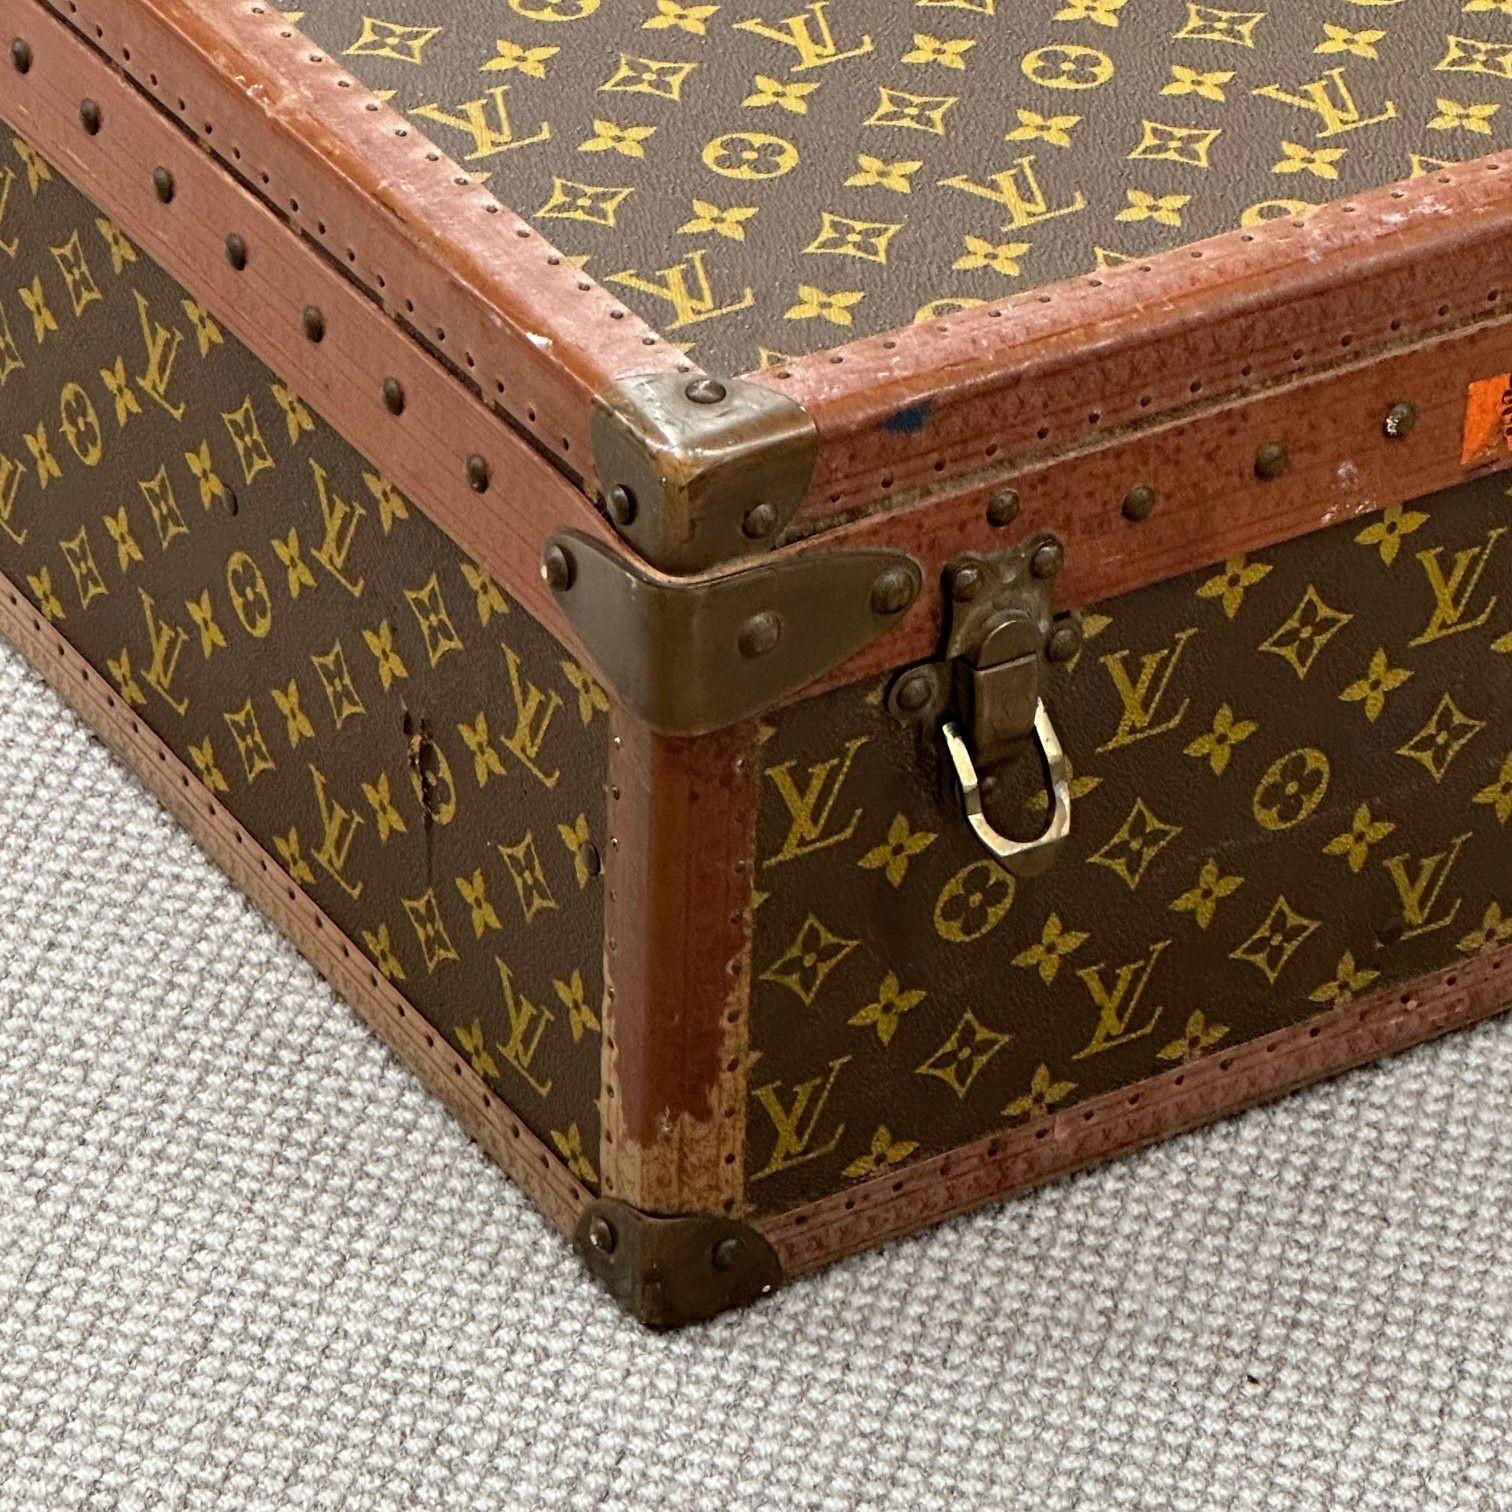 Louis Vuitton Monogram Suitcase / Luggage or Trunk, Alzer 80, Mid 20th Century For Sale 9